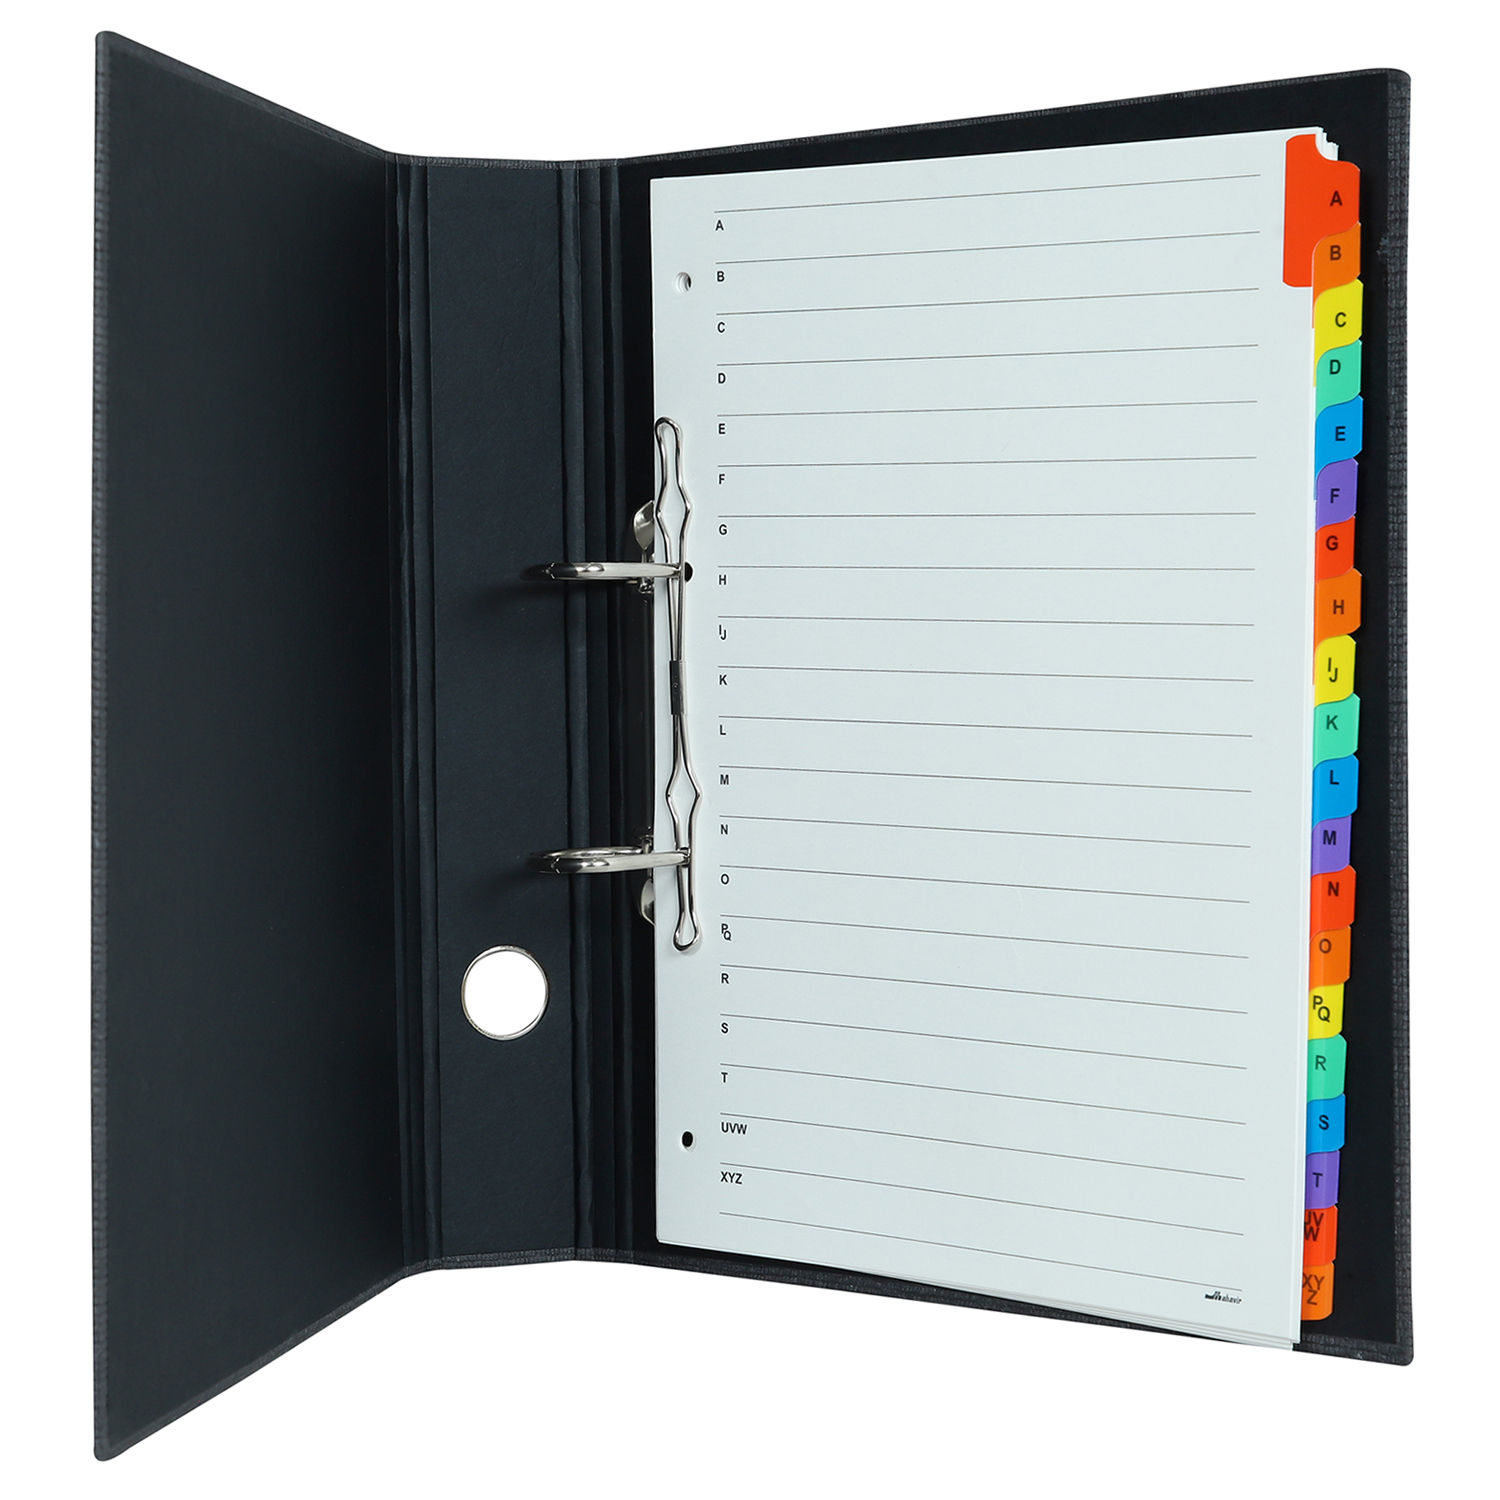 Vinyl Ring Binder | Personalize Your Learning: Customizable School Supplies  for Every Student